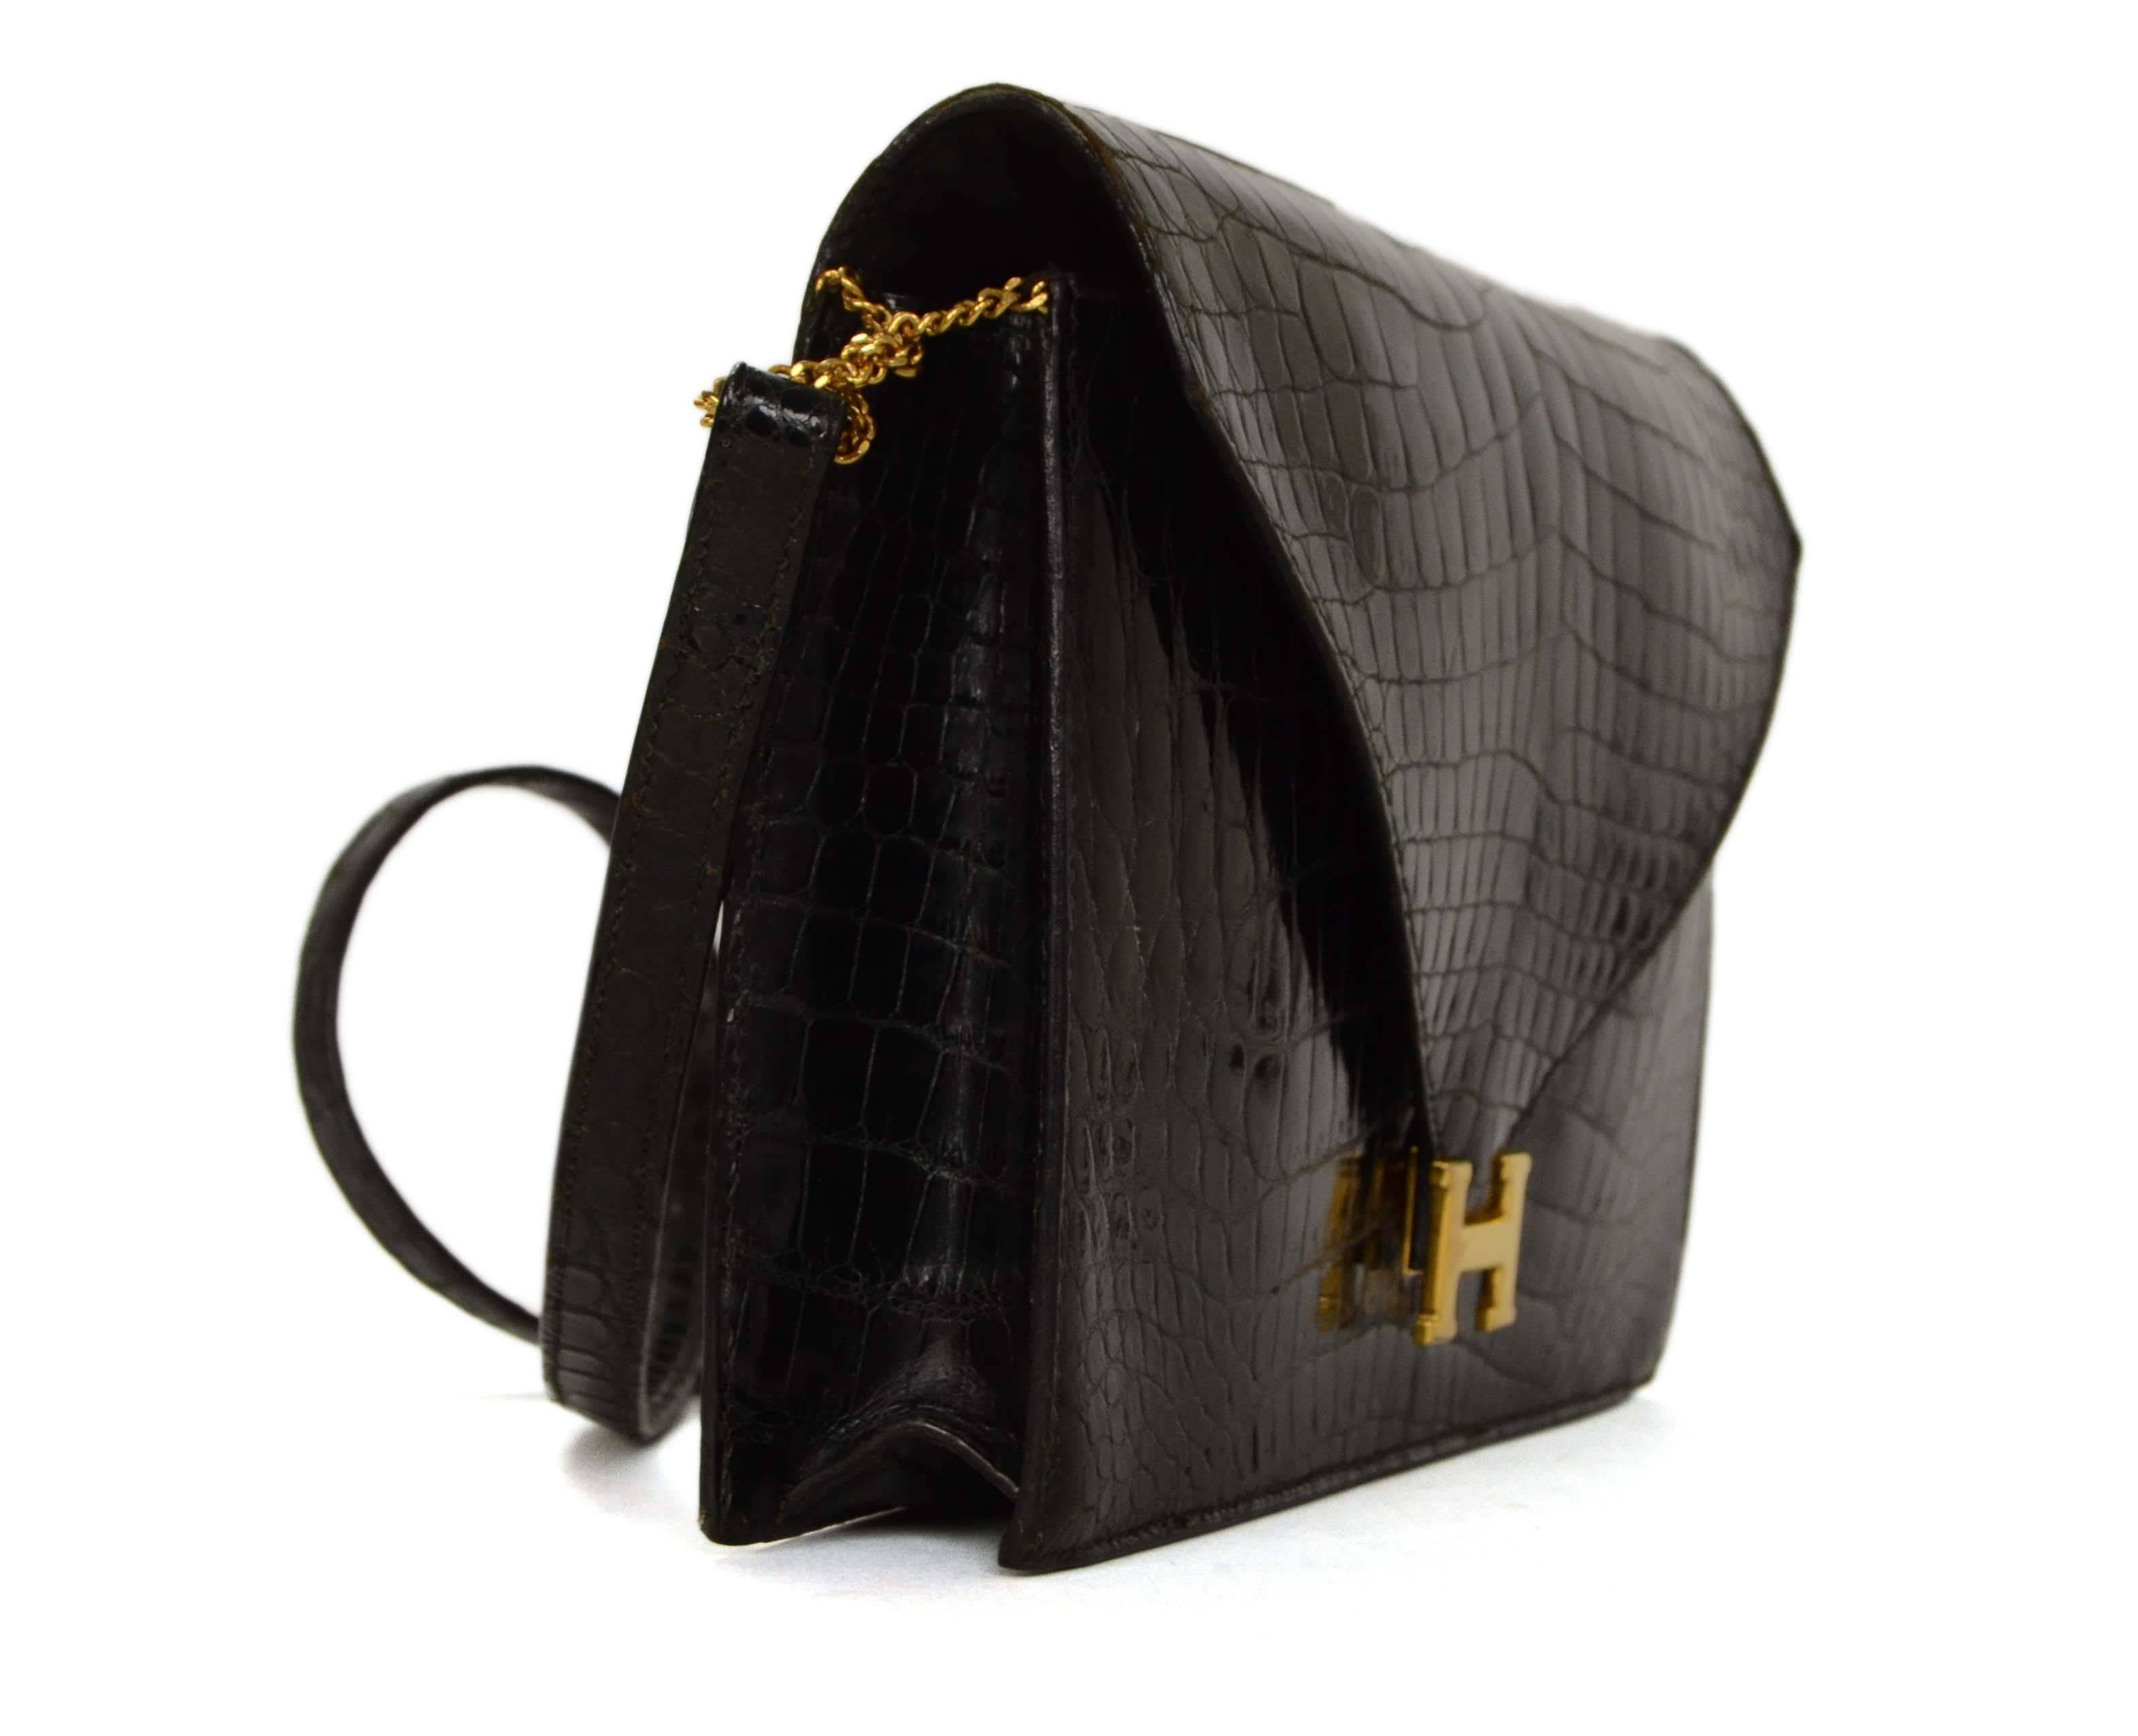 Hermes Black Crocodile Sac Lydie H Clutch 
Features optional shoulder strap
Made In: France
Color: Black
Hardware: Goldtone
Materials: Crocodile and metal
Lining: Black leather
Closure/Opening: Flap top with snap button closure
Exterior